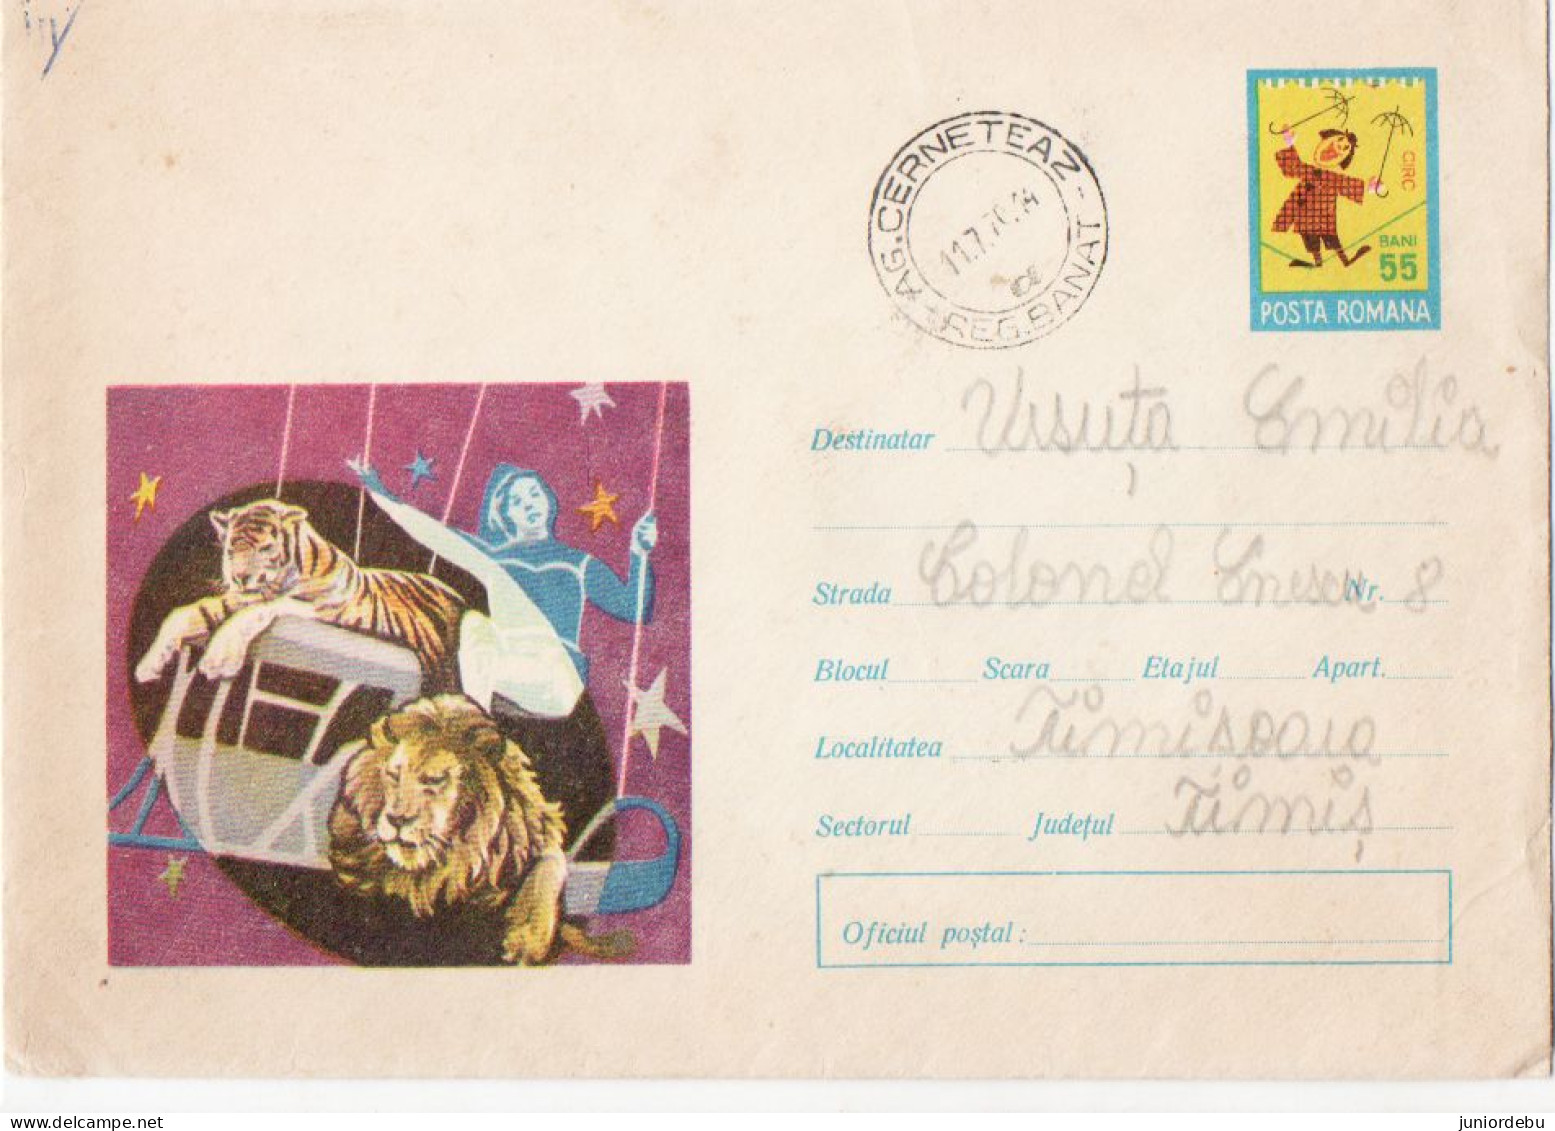 Romania - 1969  - Postal Stationery Cover  - Clown - Used. - Lettres & Documents